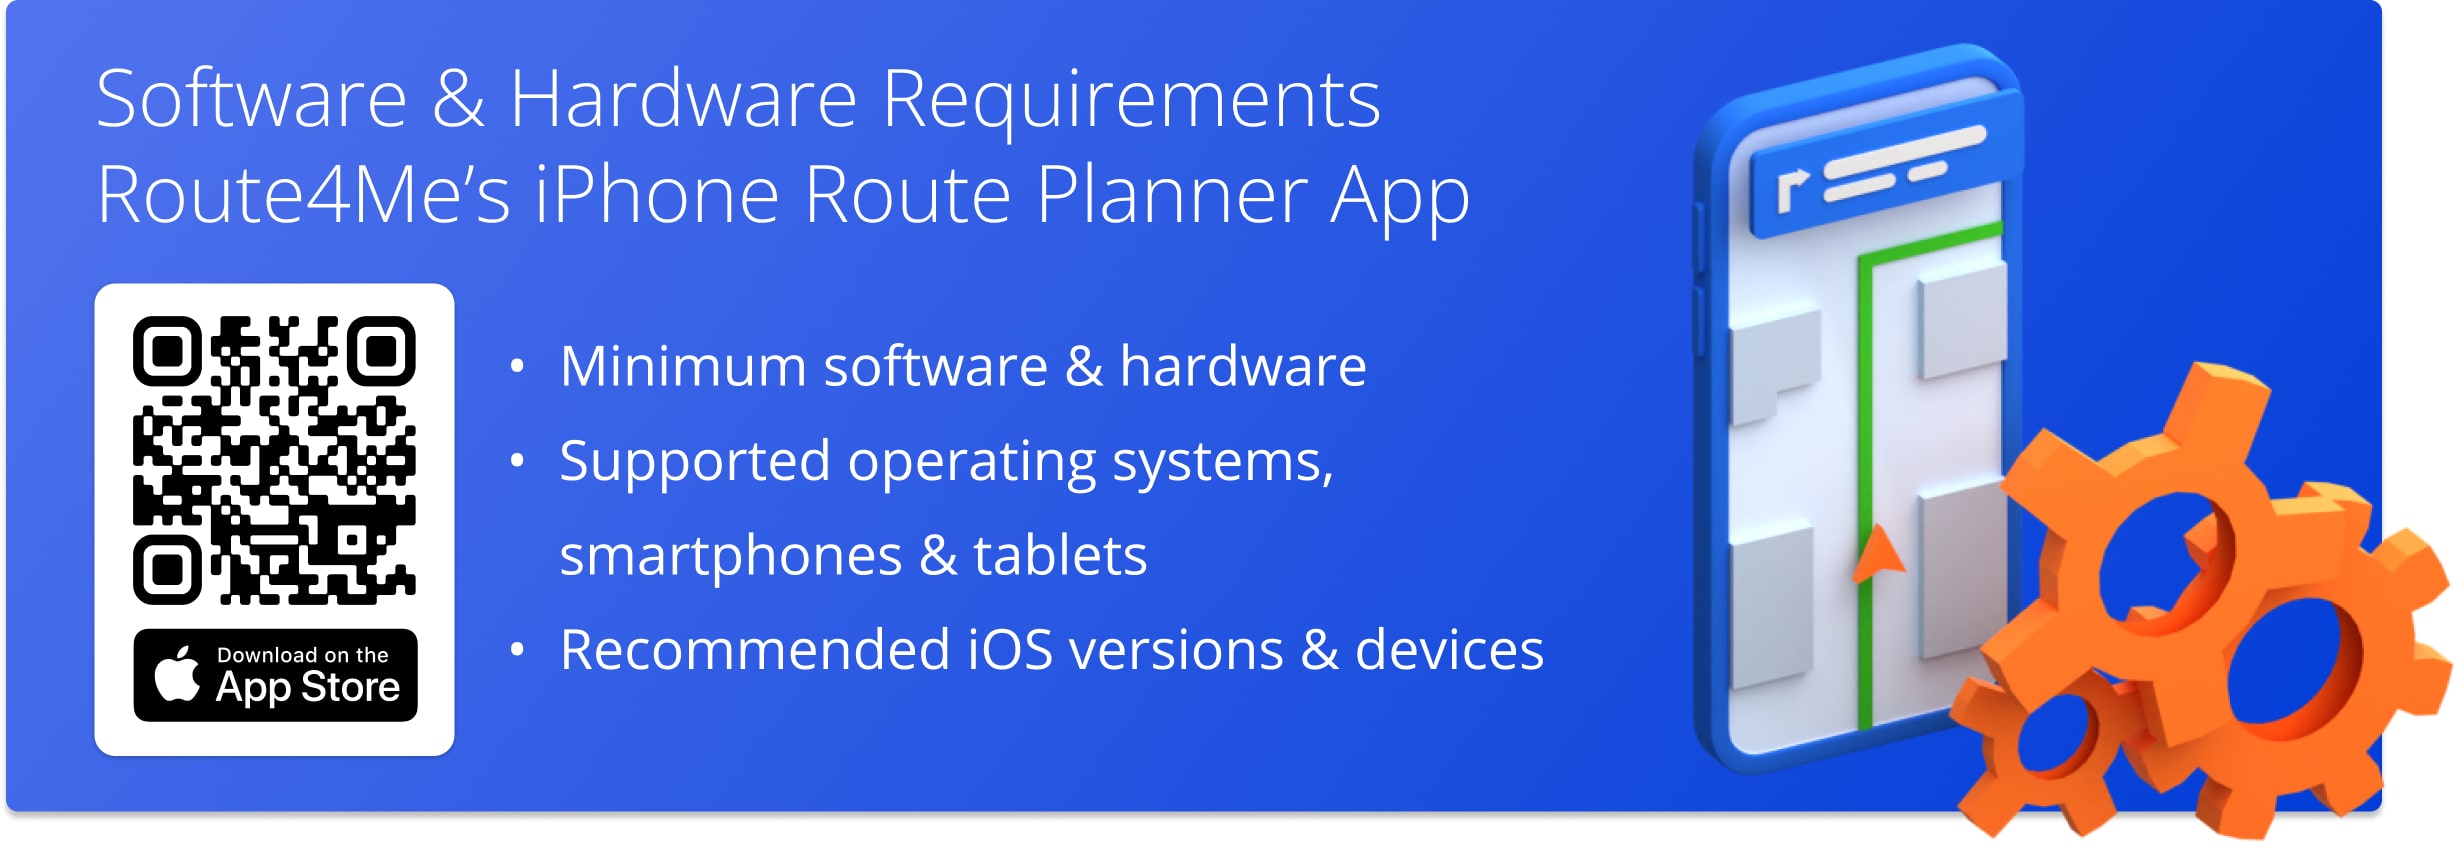 Route4Me's iPhone Route Planner app software and hardware requirements, supported iOS operating systems and devices.